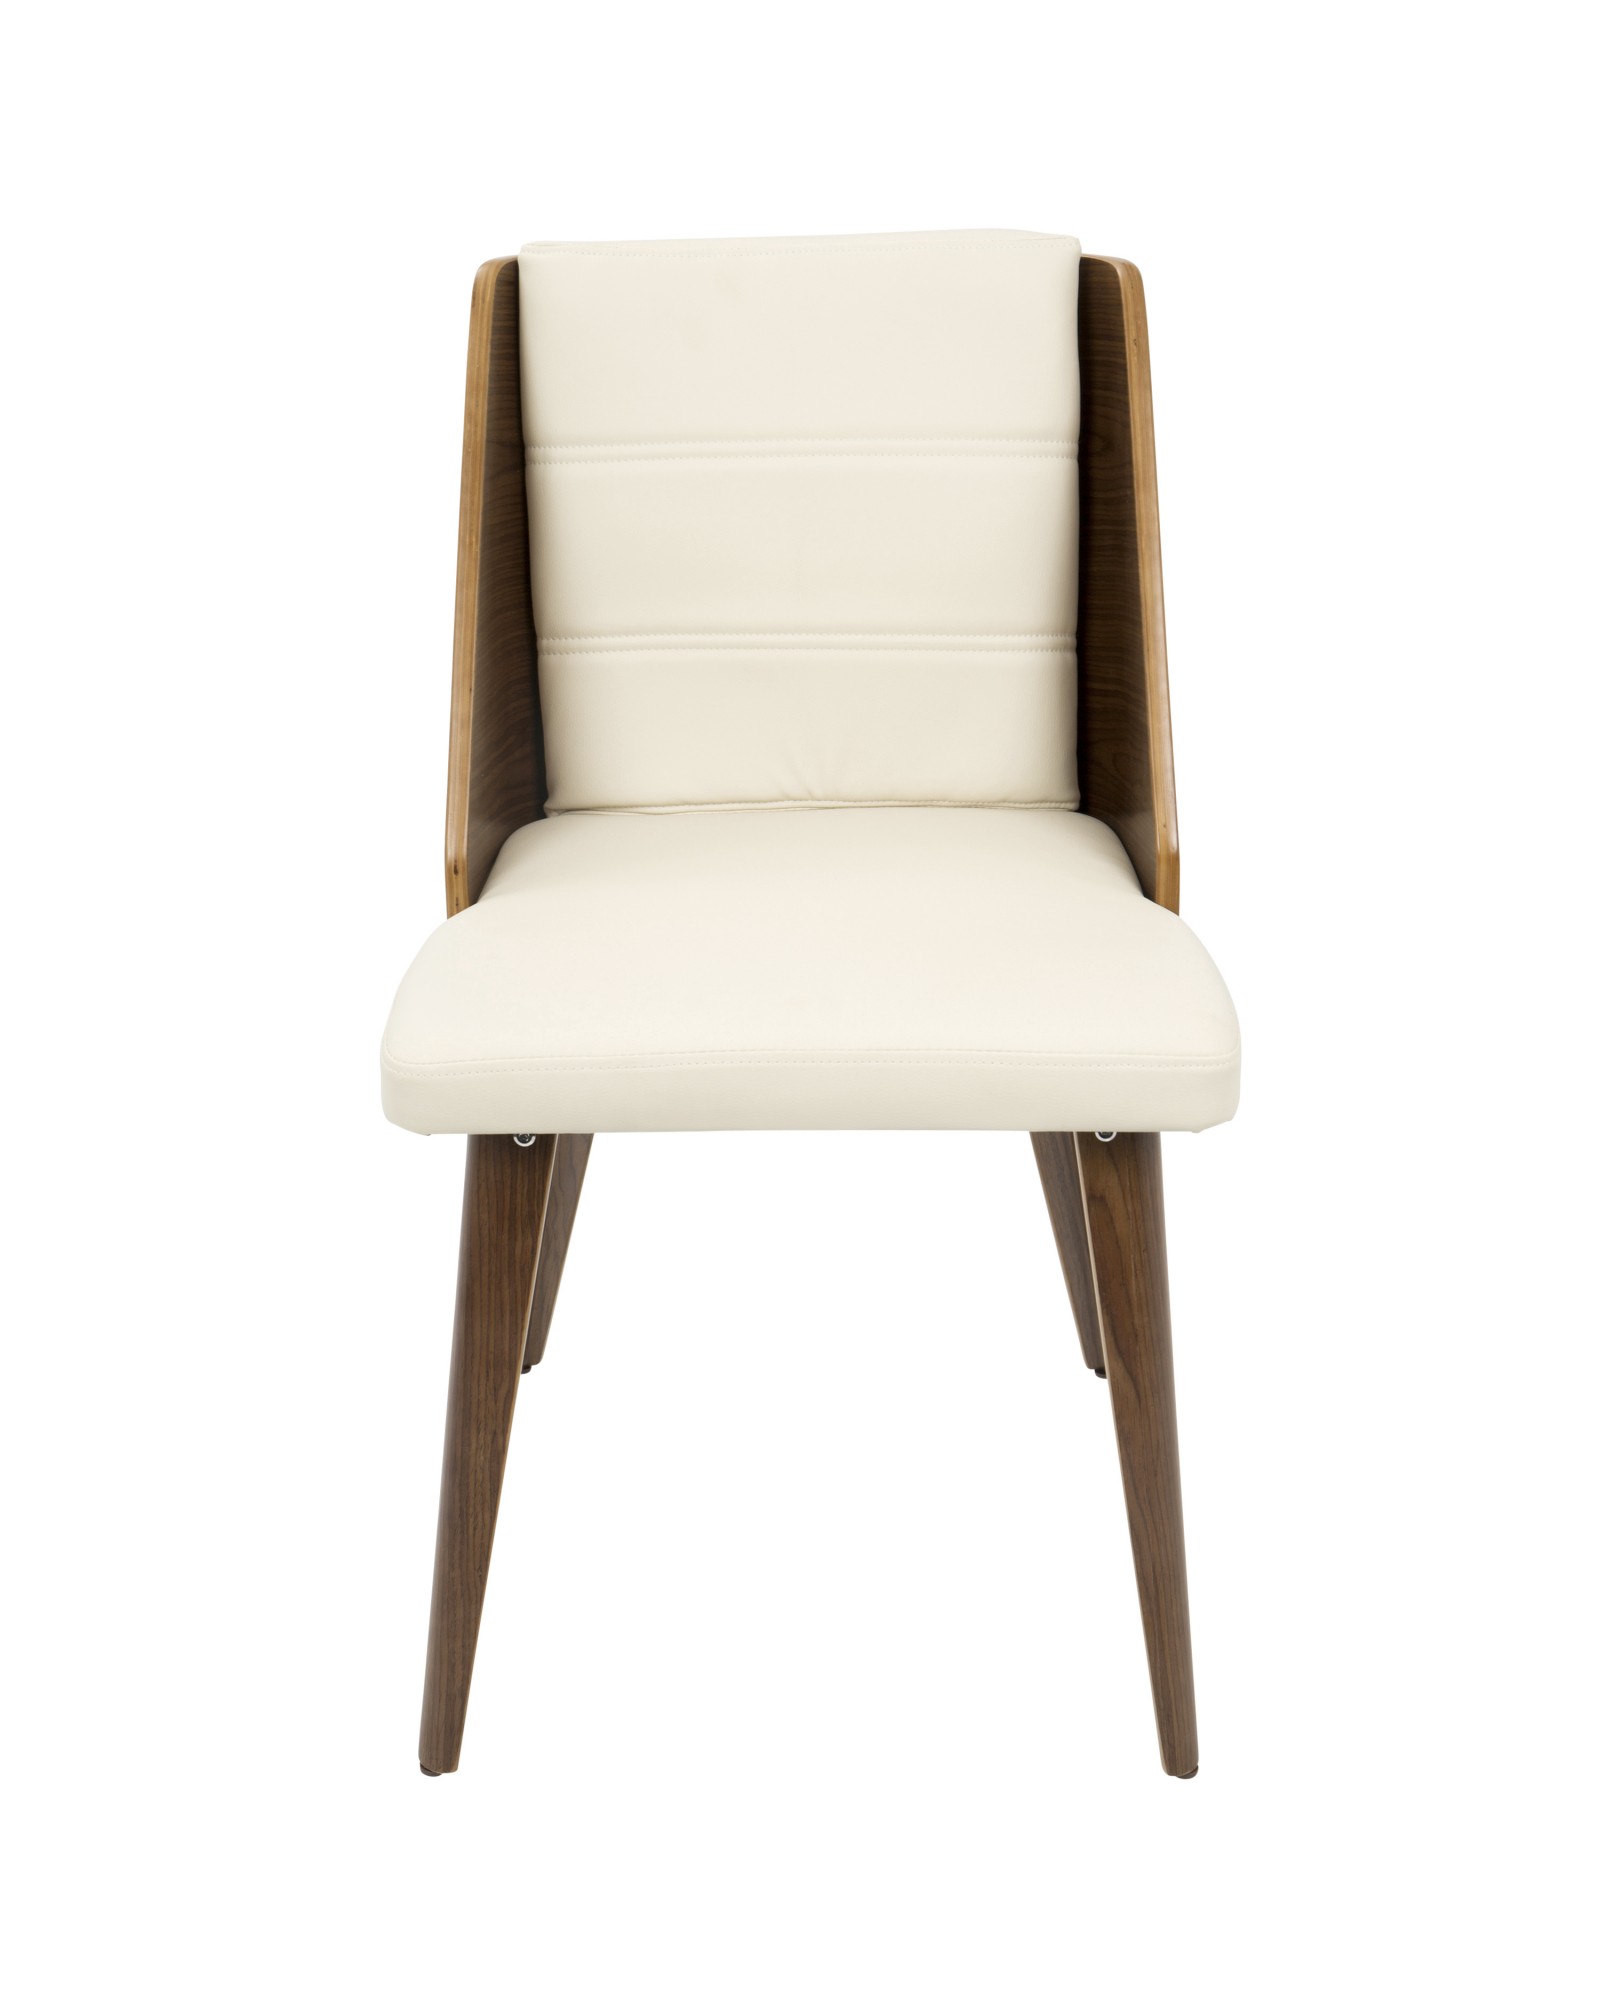 Galanti Mid-Century Modern Dining/Accent Chair in Walnut Wood and Cream Faux Leather - Set of 2